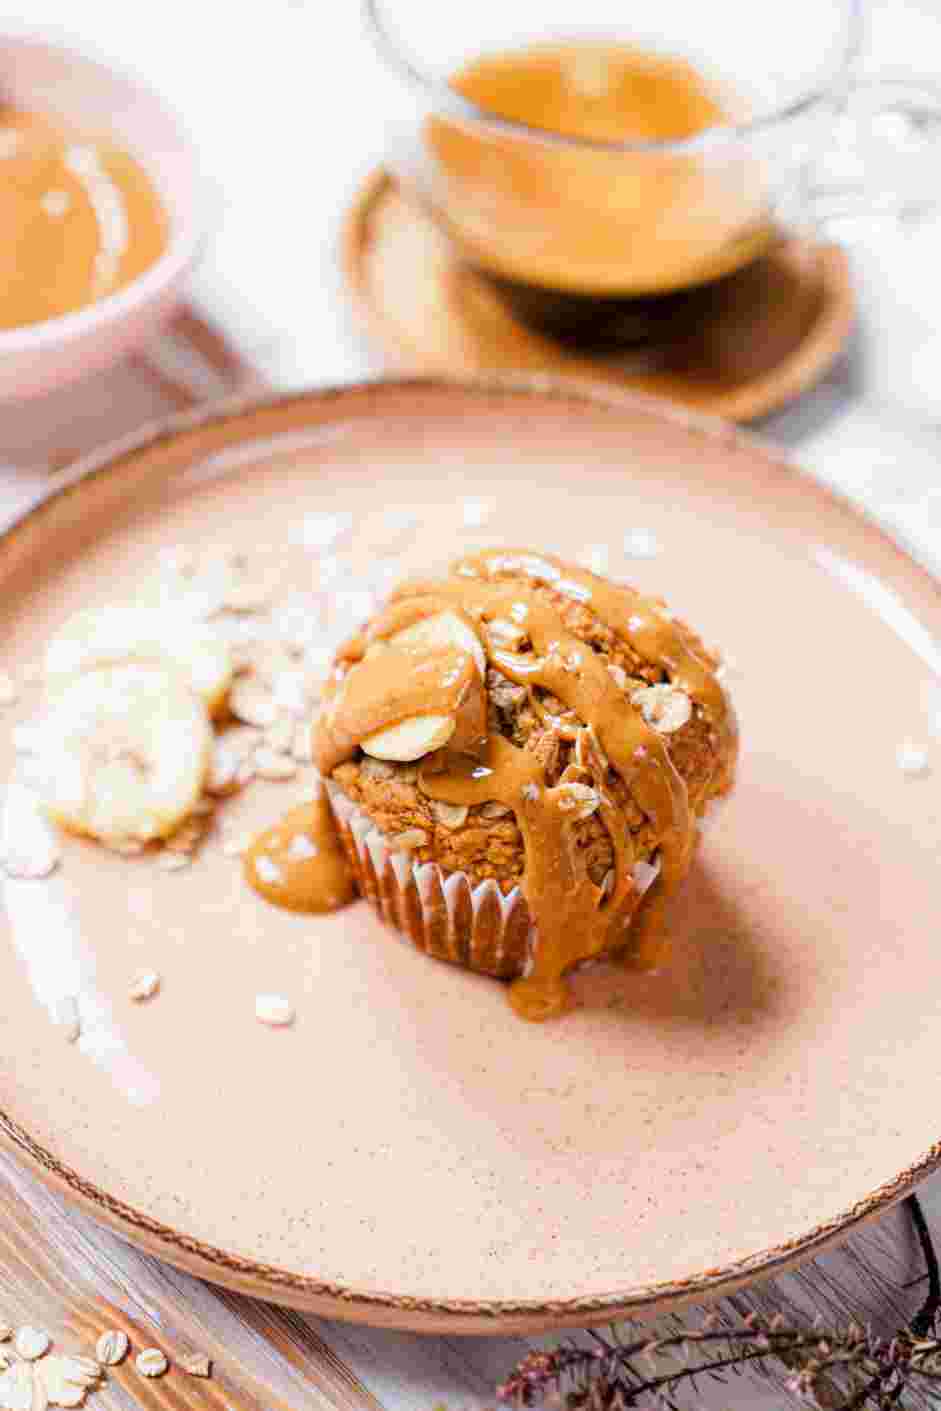 Almond Flour Banana Muffins Recipe: Drizzle with almond butter before serving and enjoy!